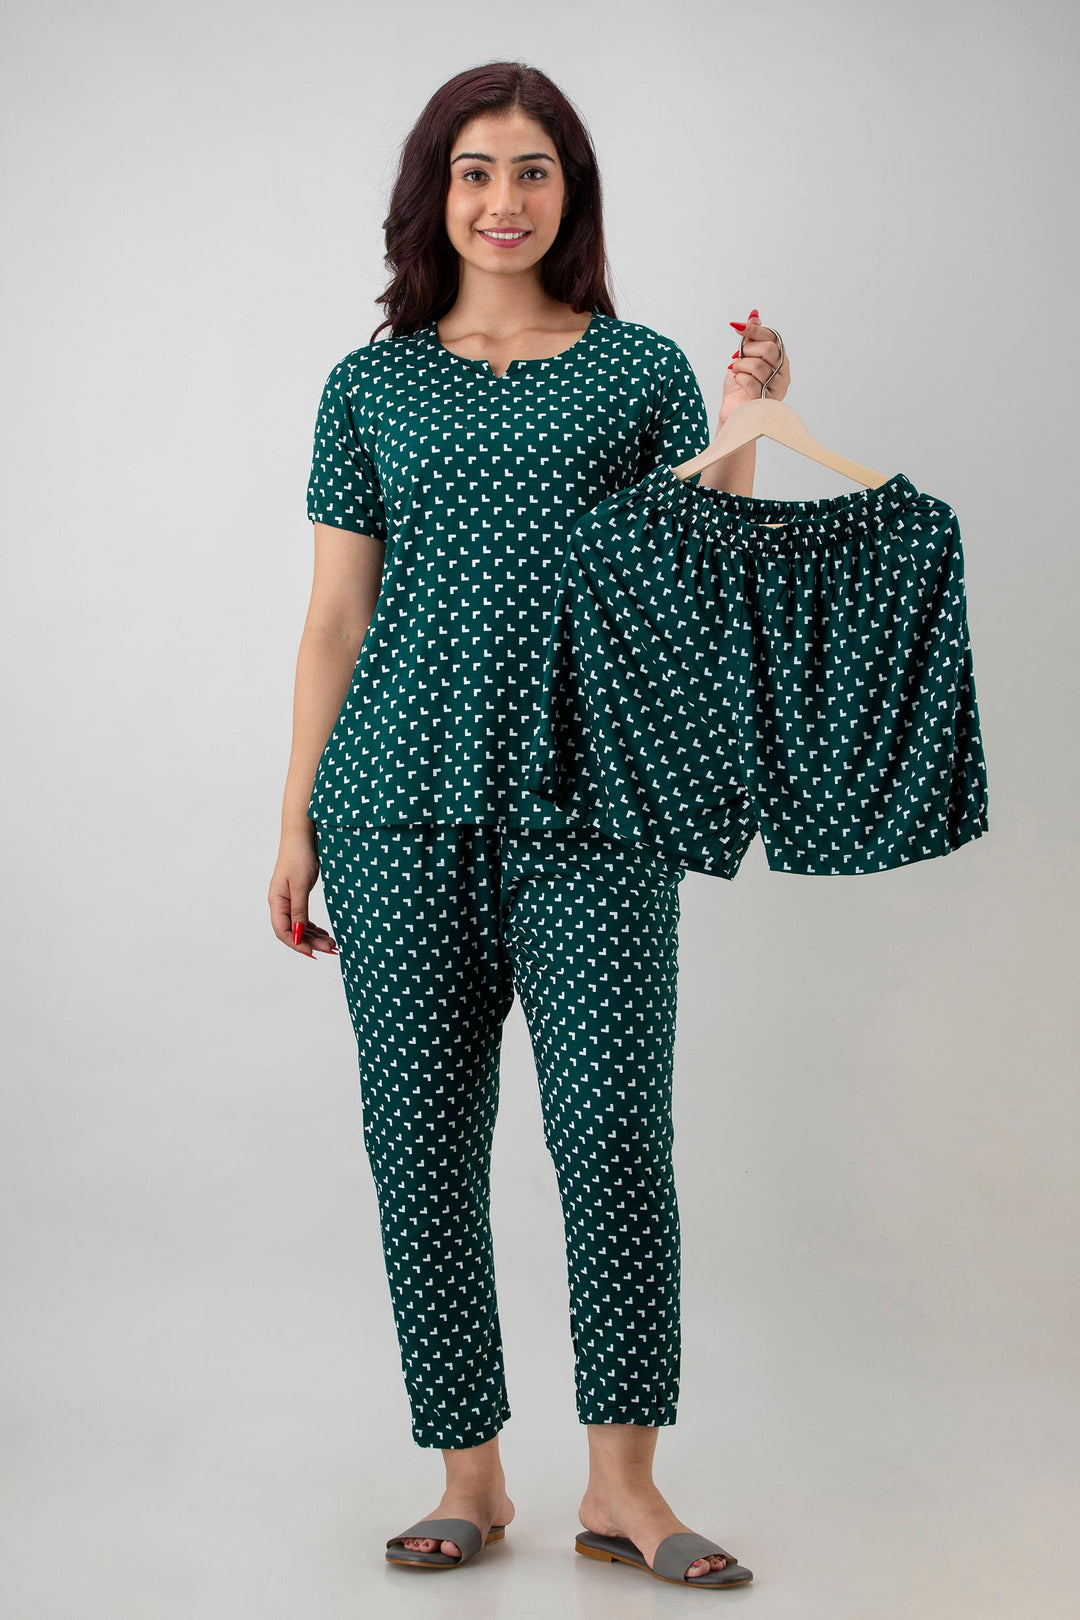 Bottle Green Rayon Shirt and Pant Night Suit